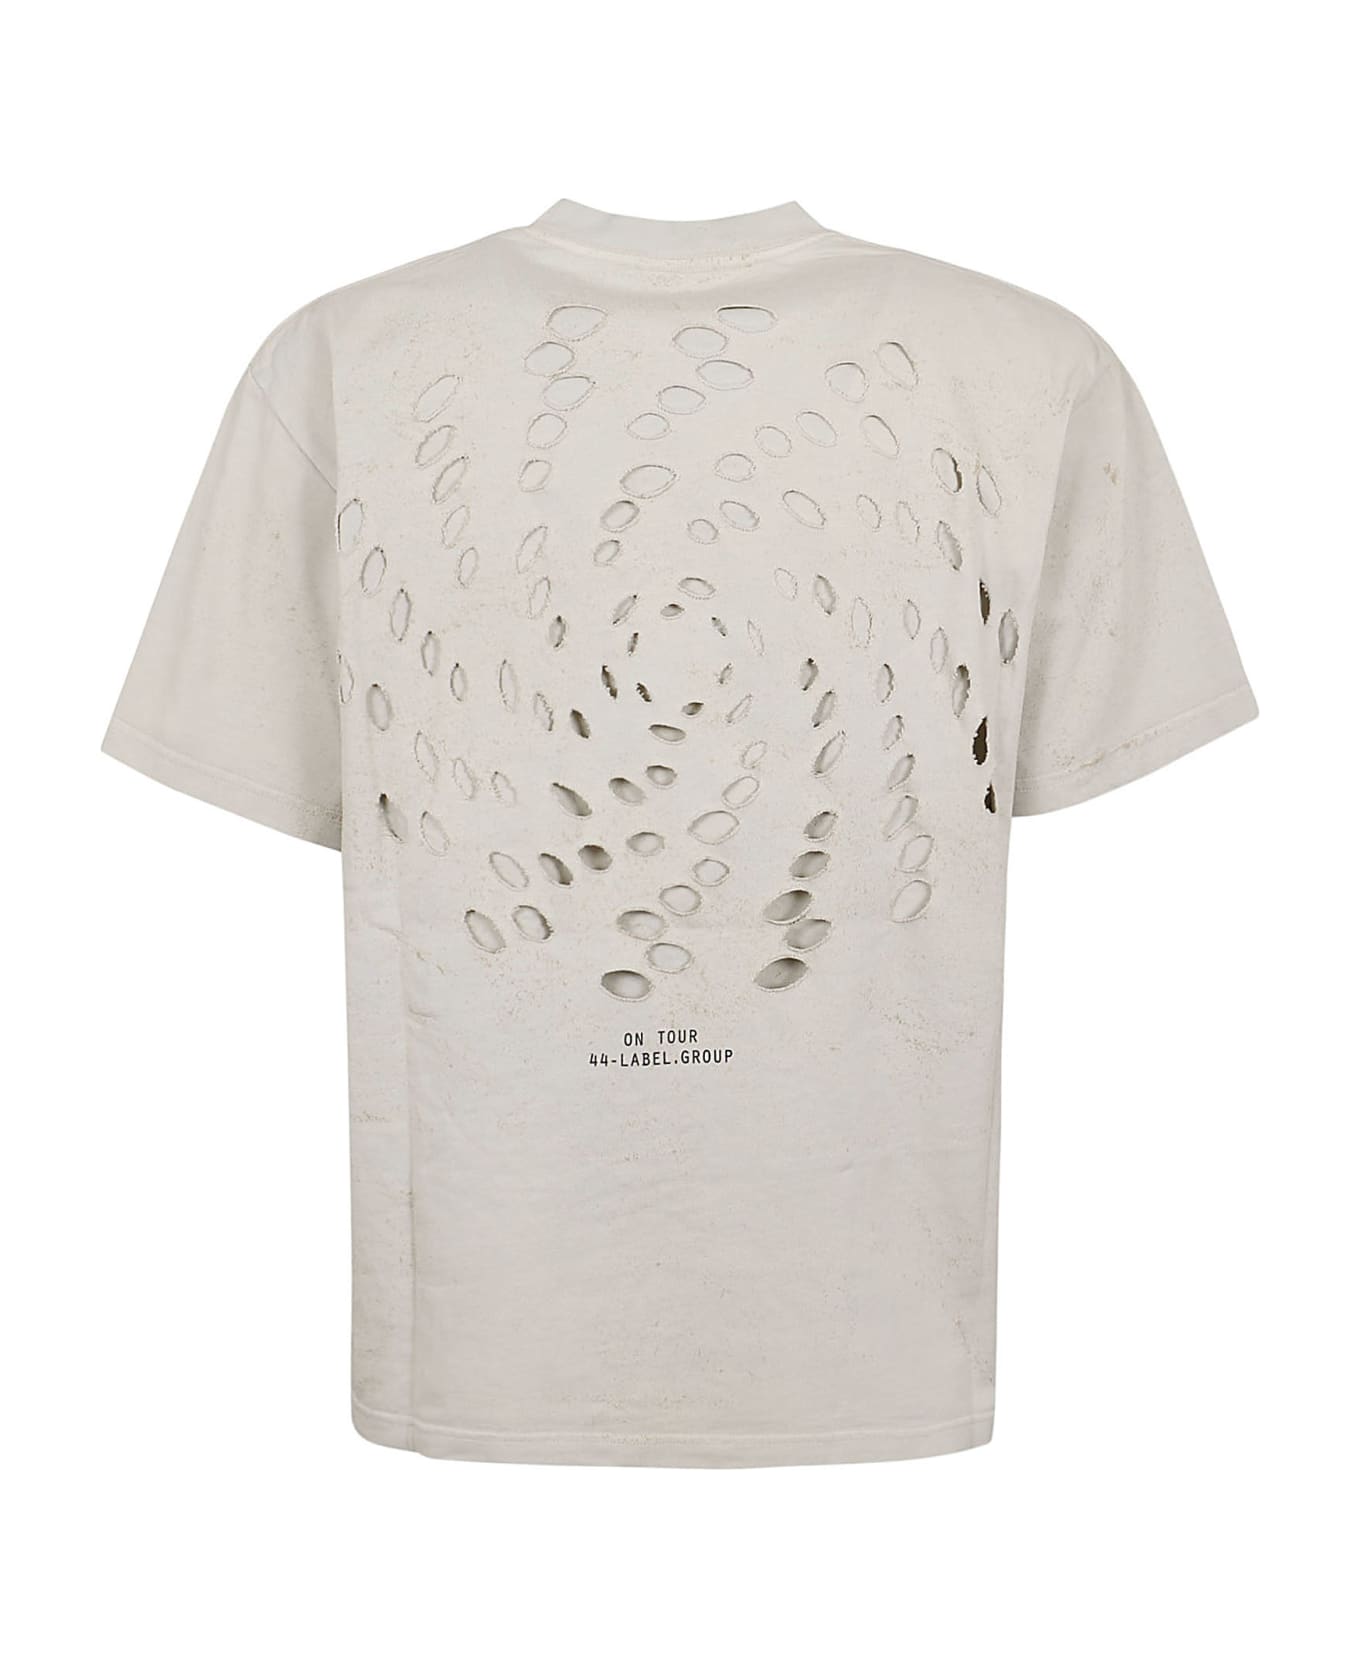 44 Label Group Trip Tee - Dirty White Gyps シャツ